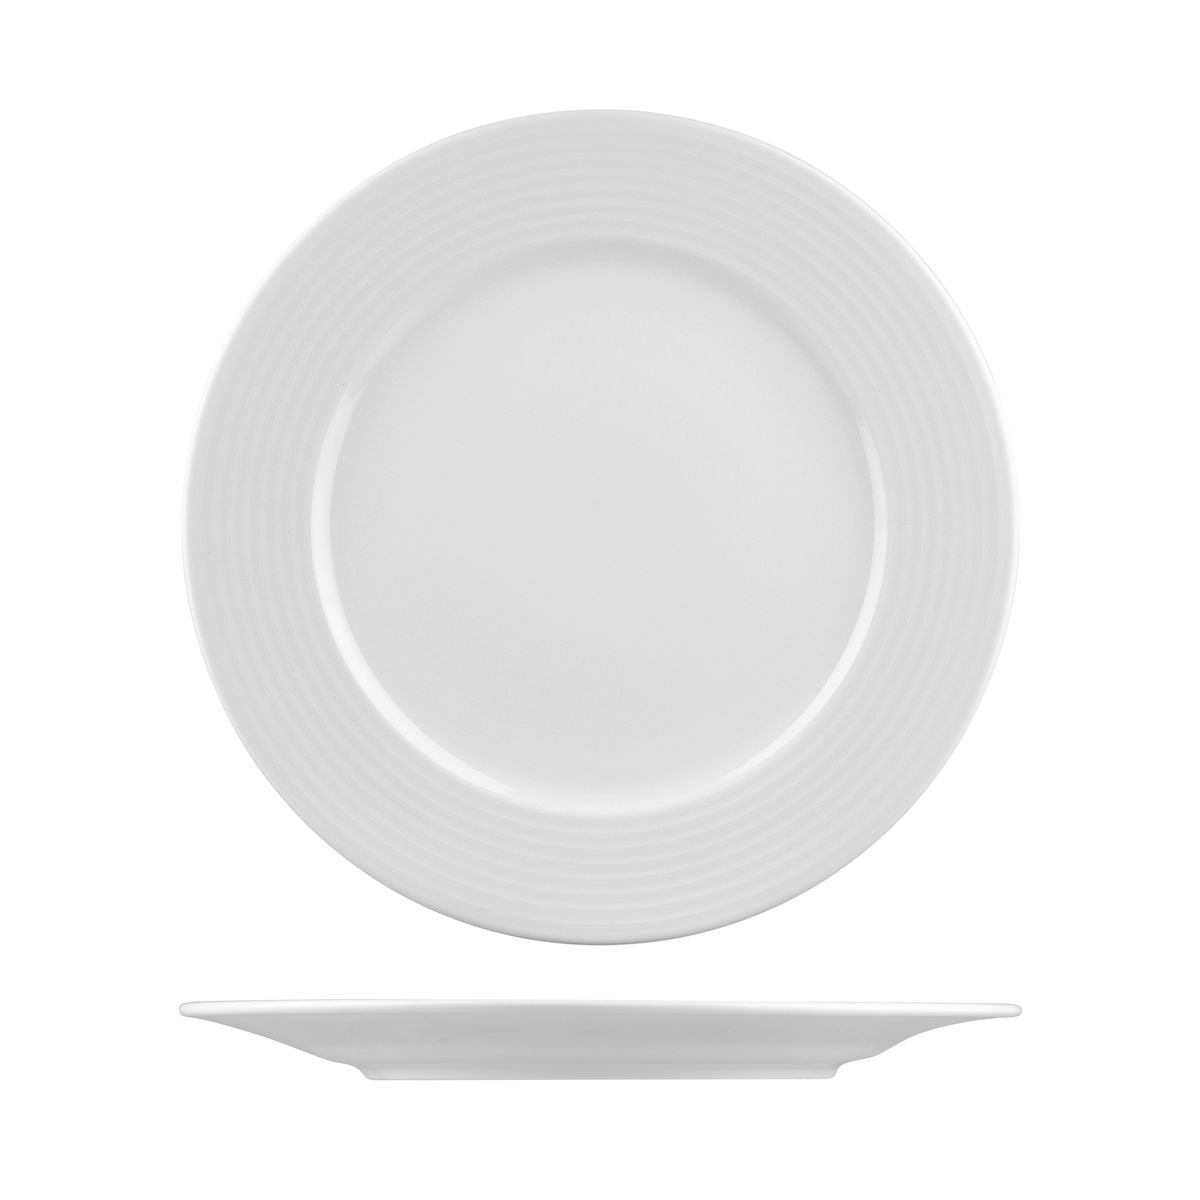 Round Plate - 310Mm, Rondo from Rak Porcelain. made out of Porcelain and sold in boxes of 12. Hospitality quality at wholesale price with The Flying Fork! 